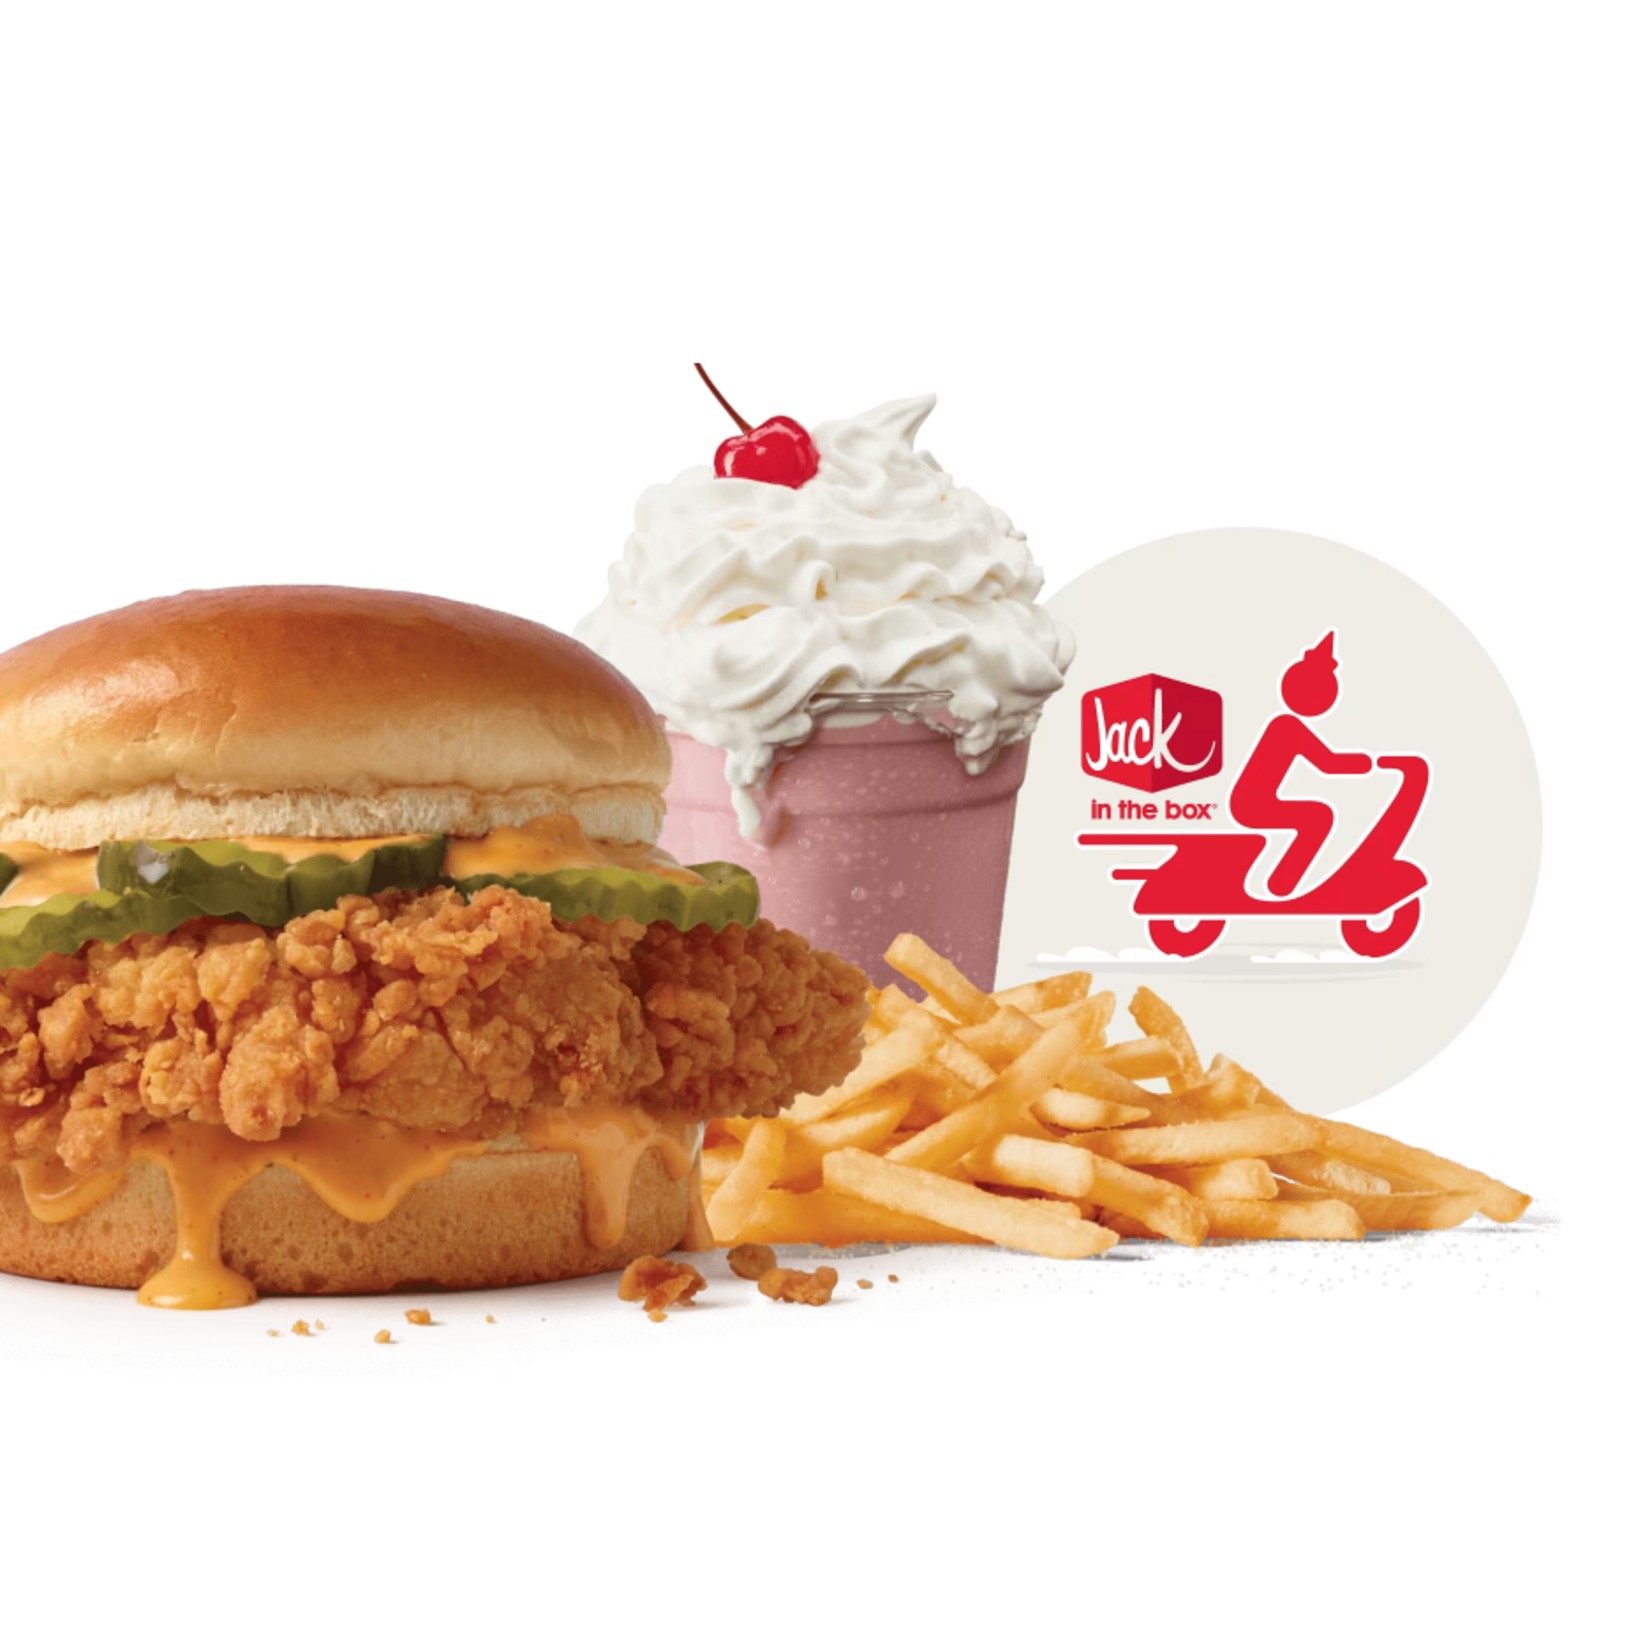 Jack in the Box Jack in the Box - St George UT $13 - Sourdough Jack Combo